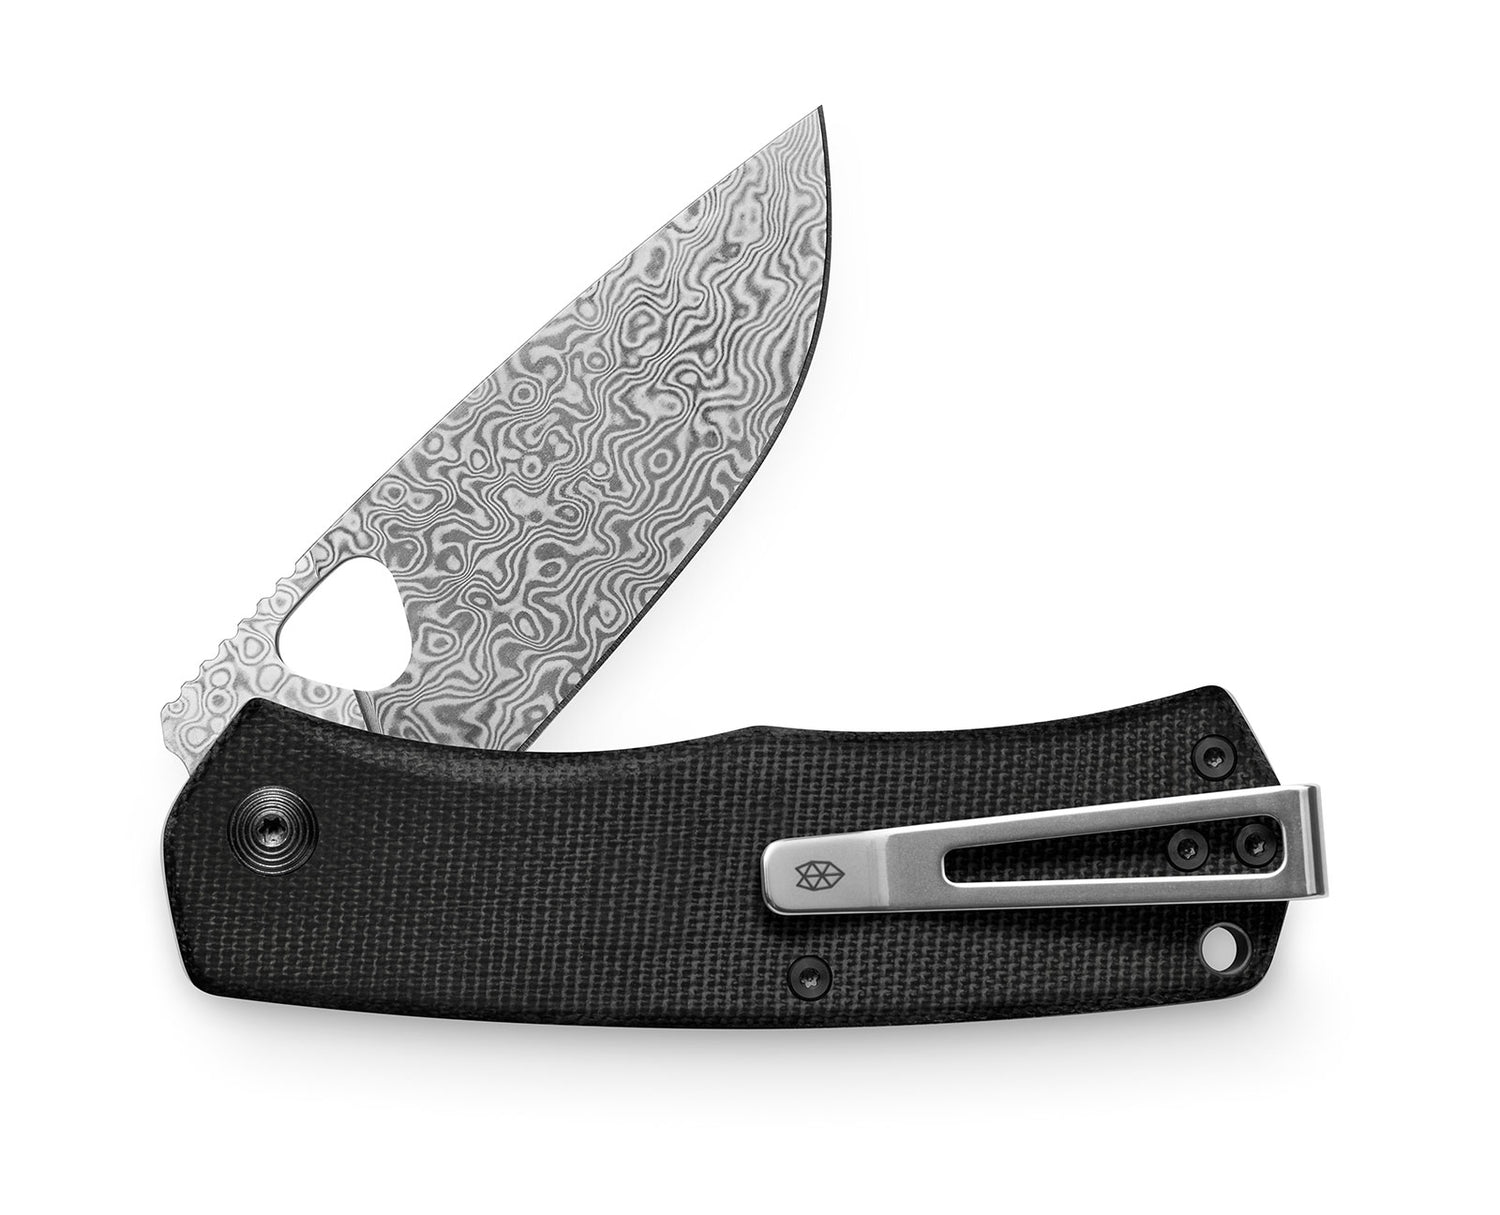 The Folsom knife with black micarta handle and damascus blade.